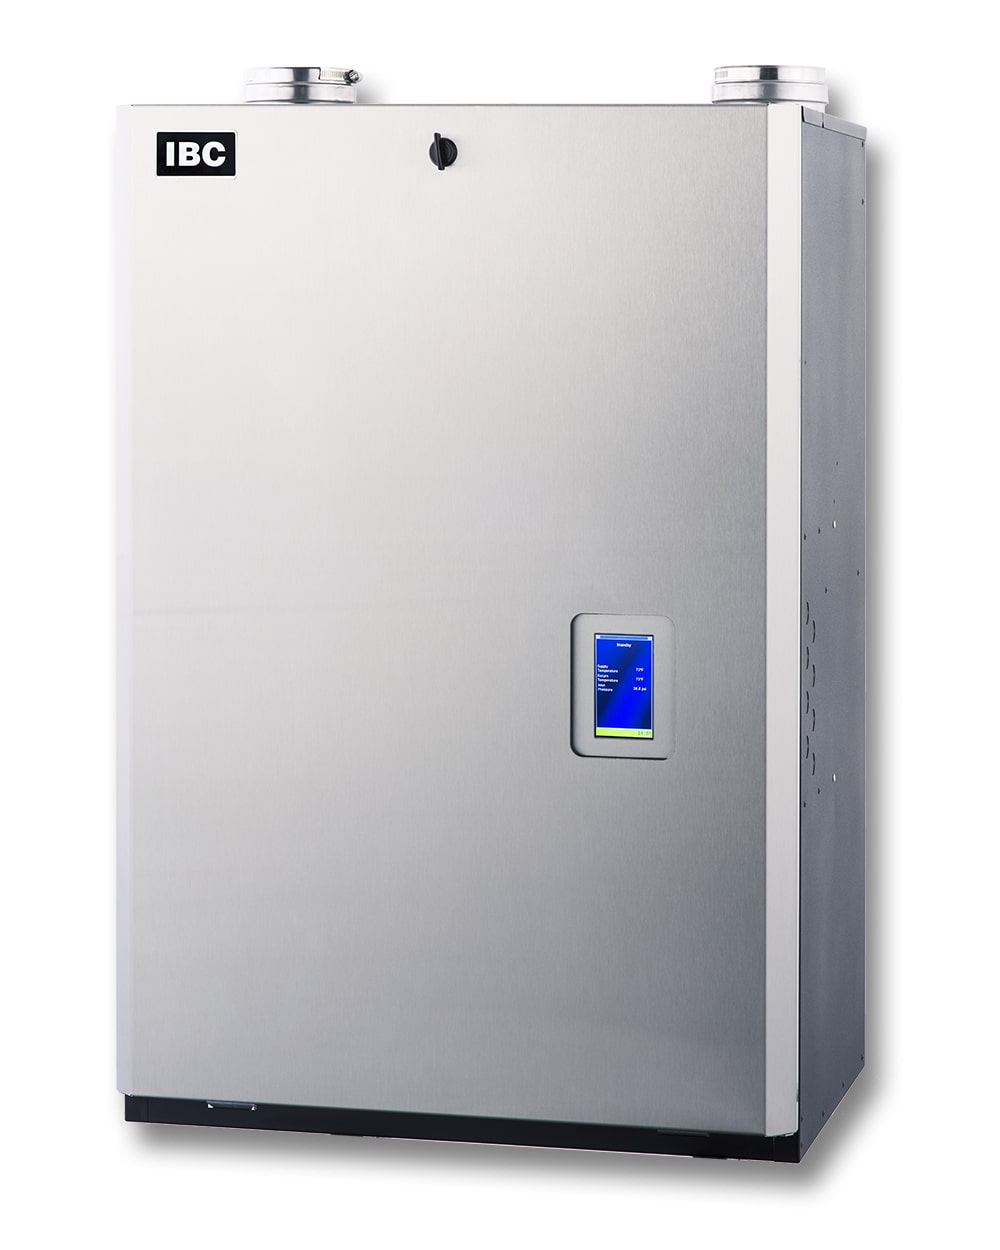 IBC SL Series Residential & Light Commercial Condensing Boilers